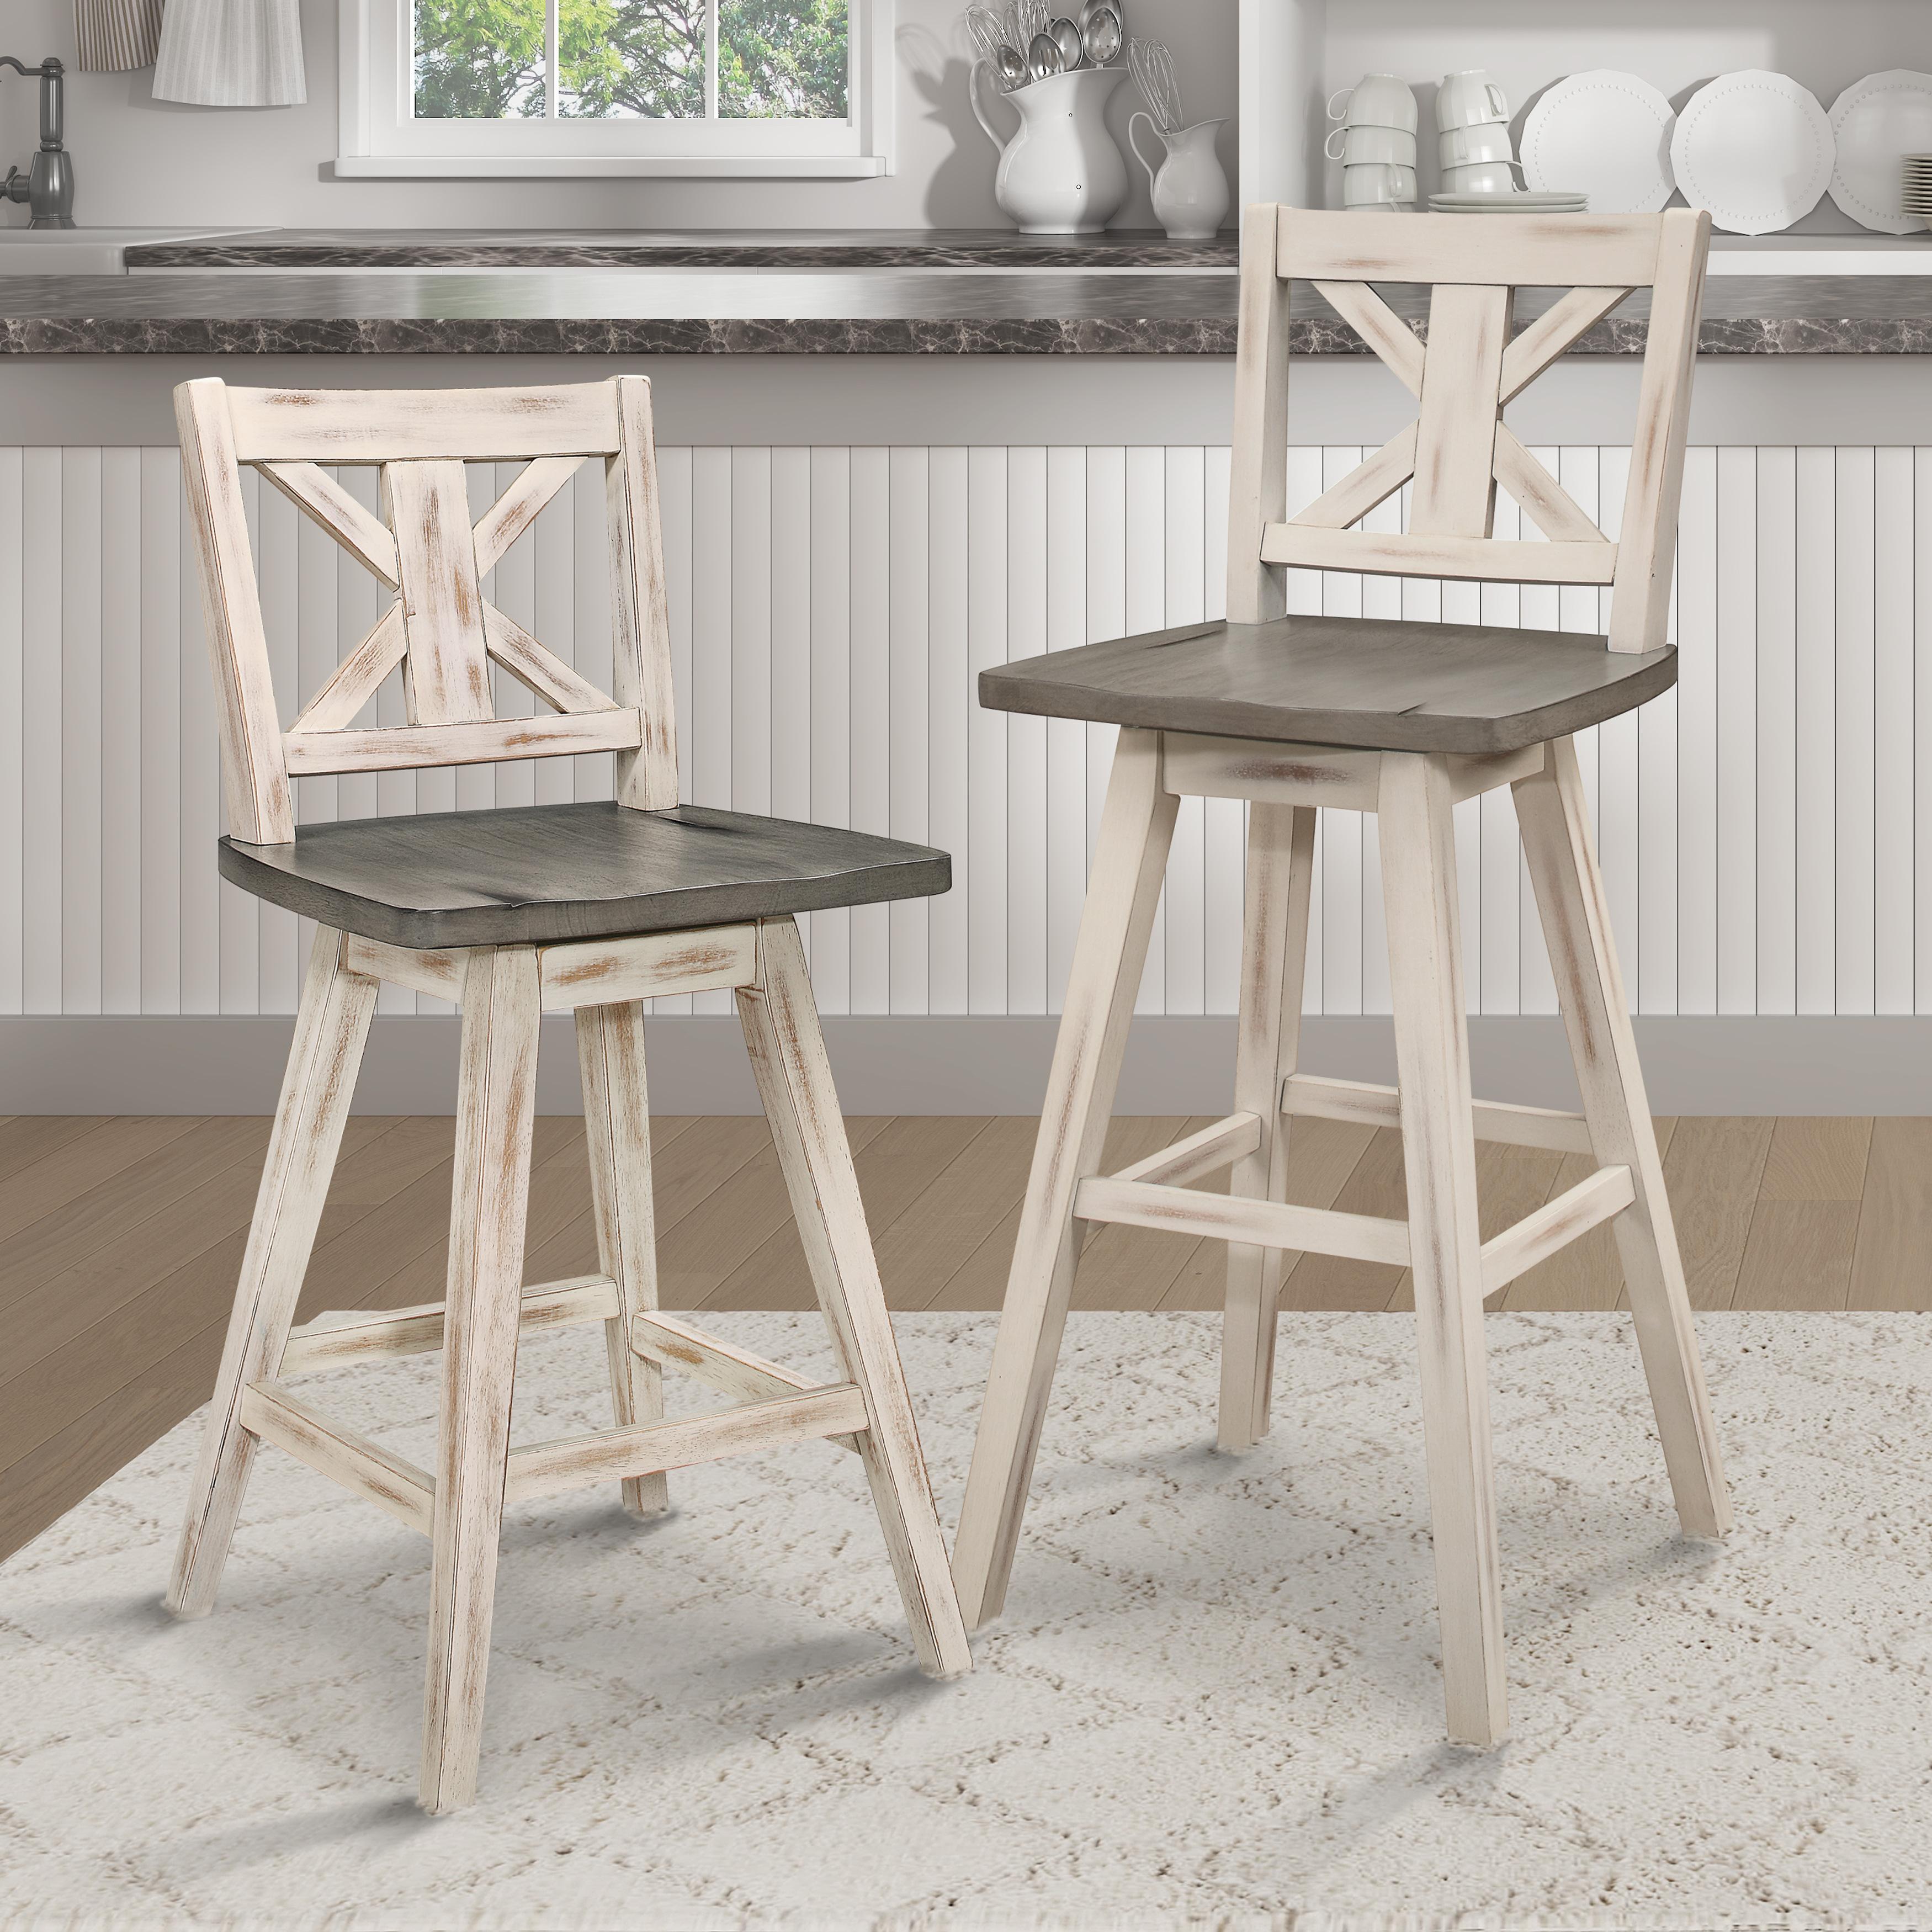 

    
5602-24WT Rustic Distressed Gray & White Solid Wood 24" Counter Height Chair Set 2pcs Homelegance 5602-24WT Amsonia
